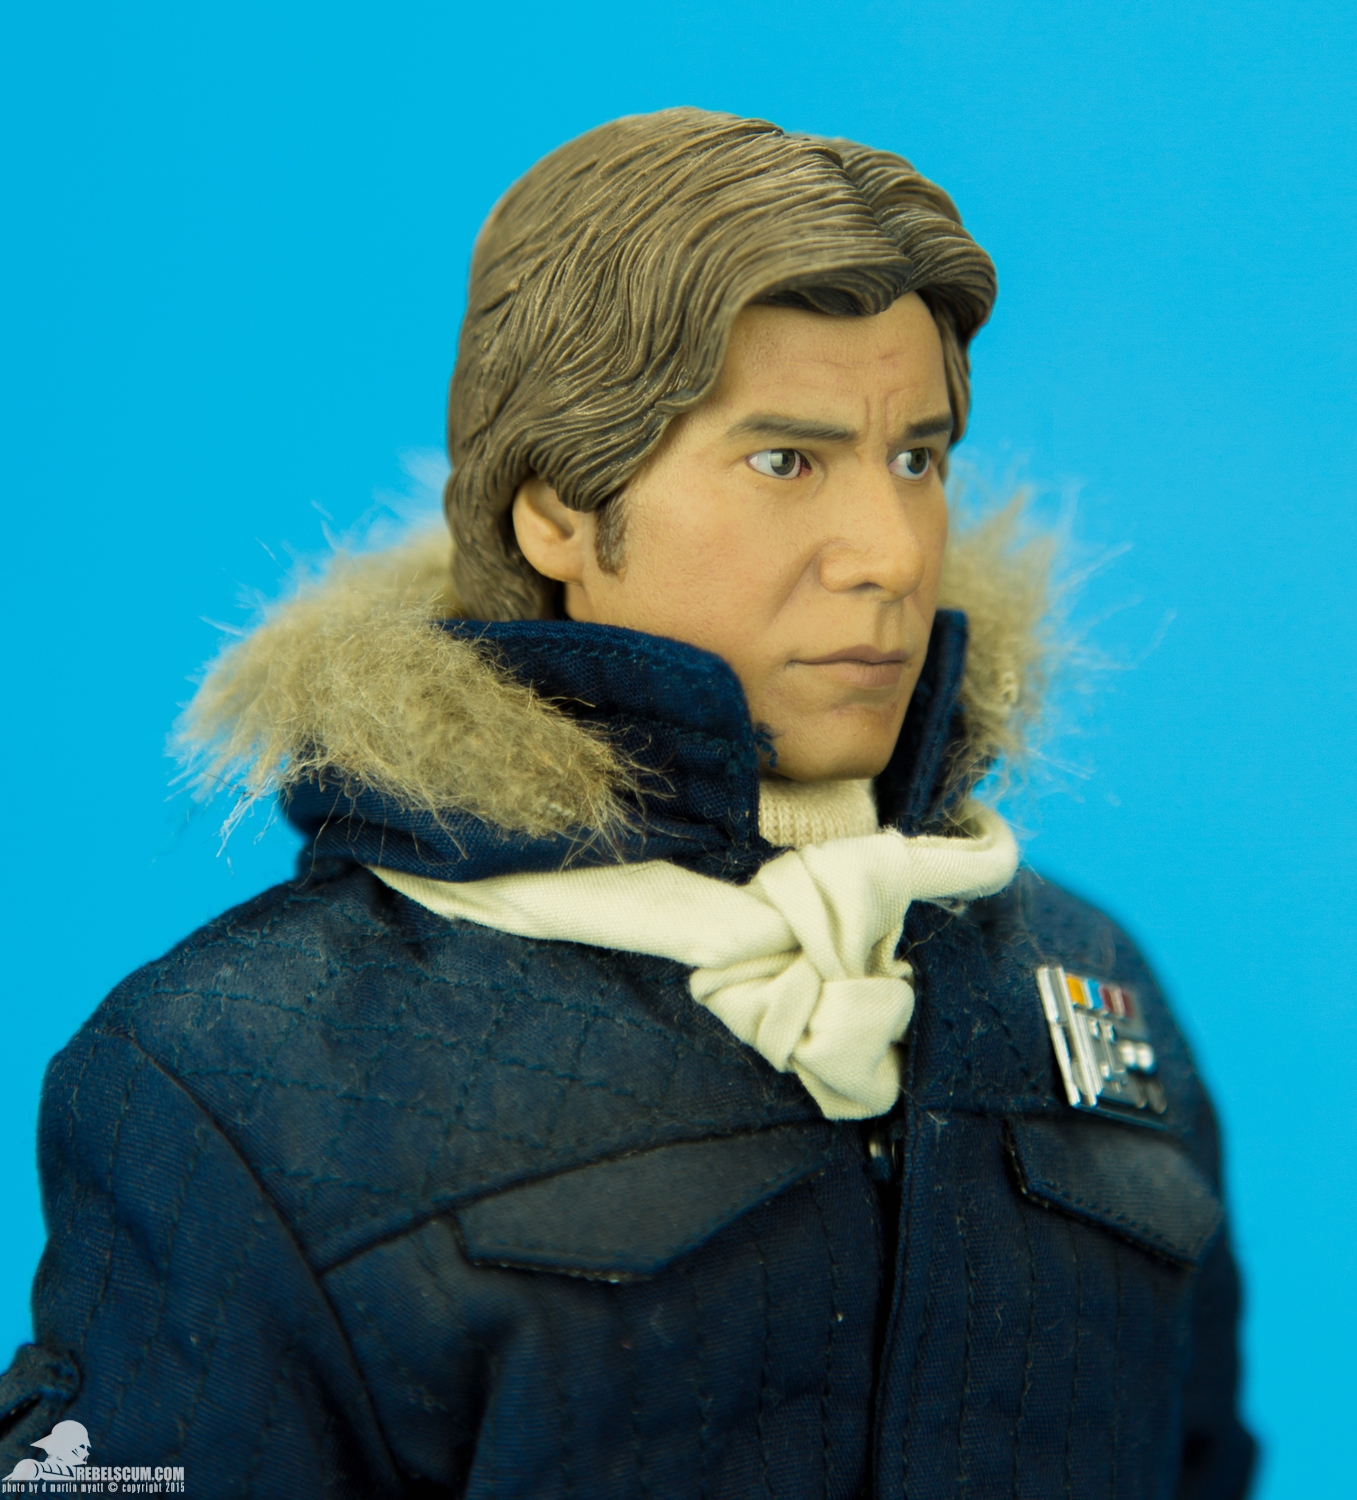 Han-Solo-Hoth-Blue-Sixth-Scale-Sideshow-Collectibles-Star-Wars-010.jpg